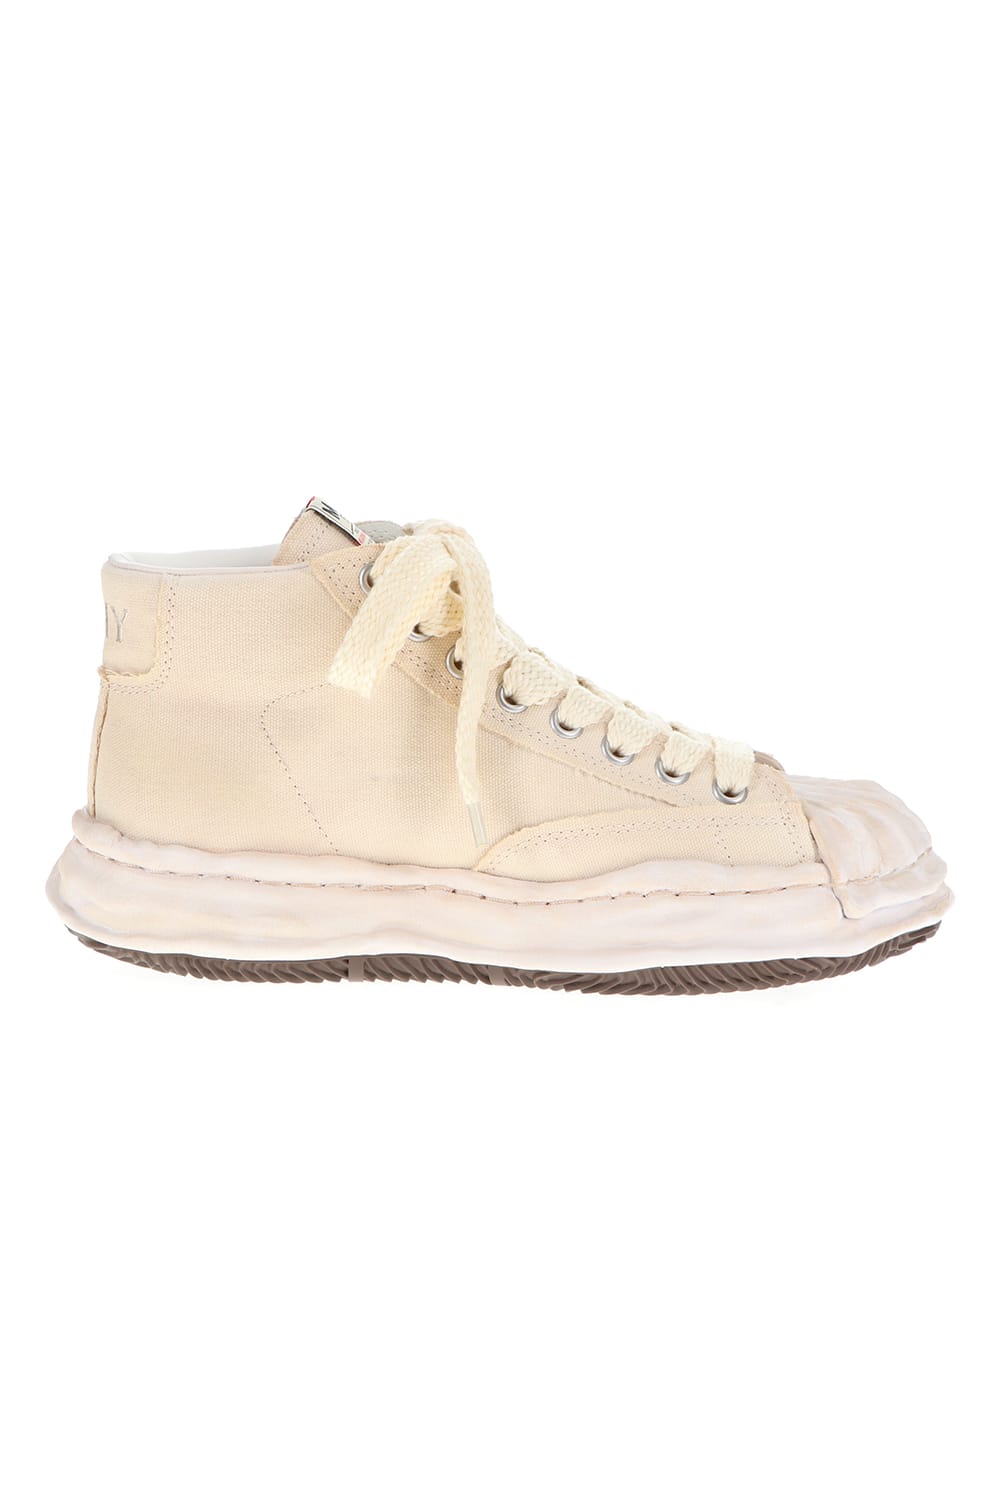 -BLAKEY High- Original STC sole over dyed canvas High-Top sneakers White